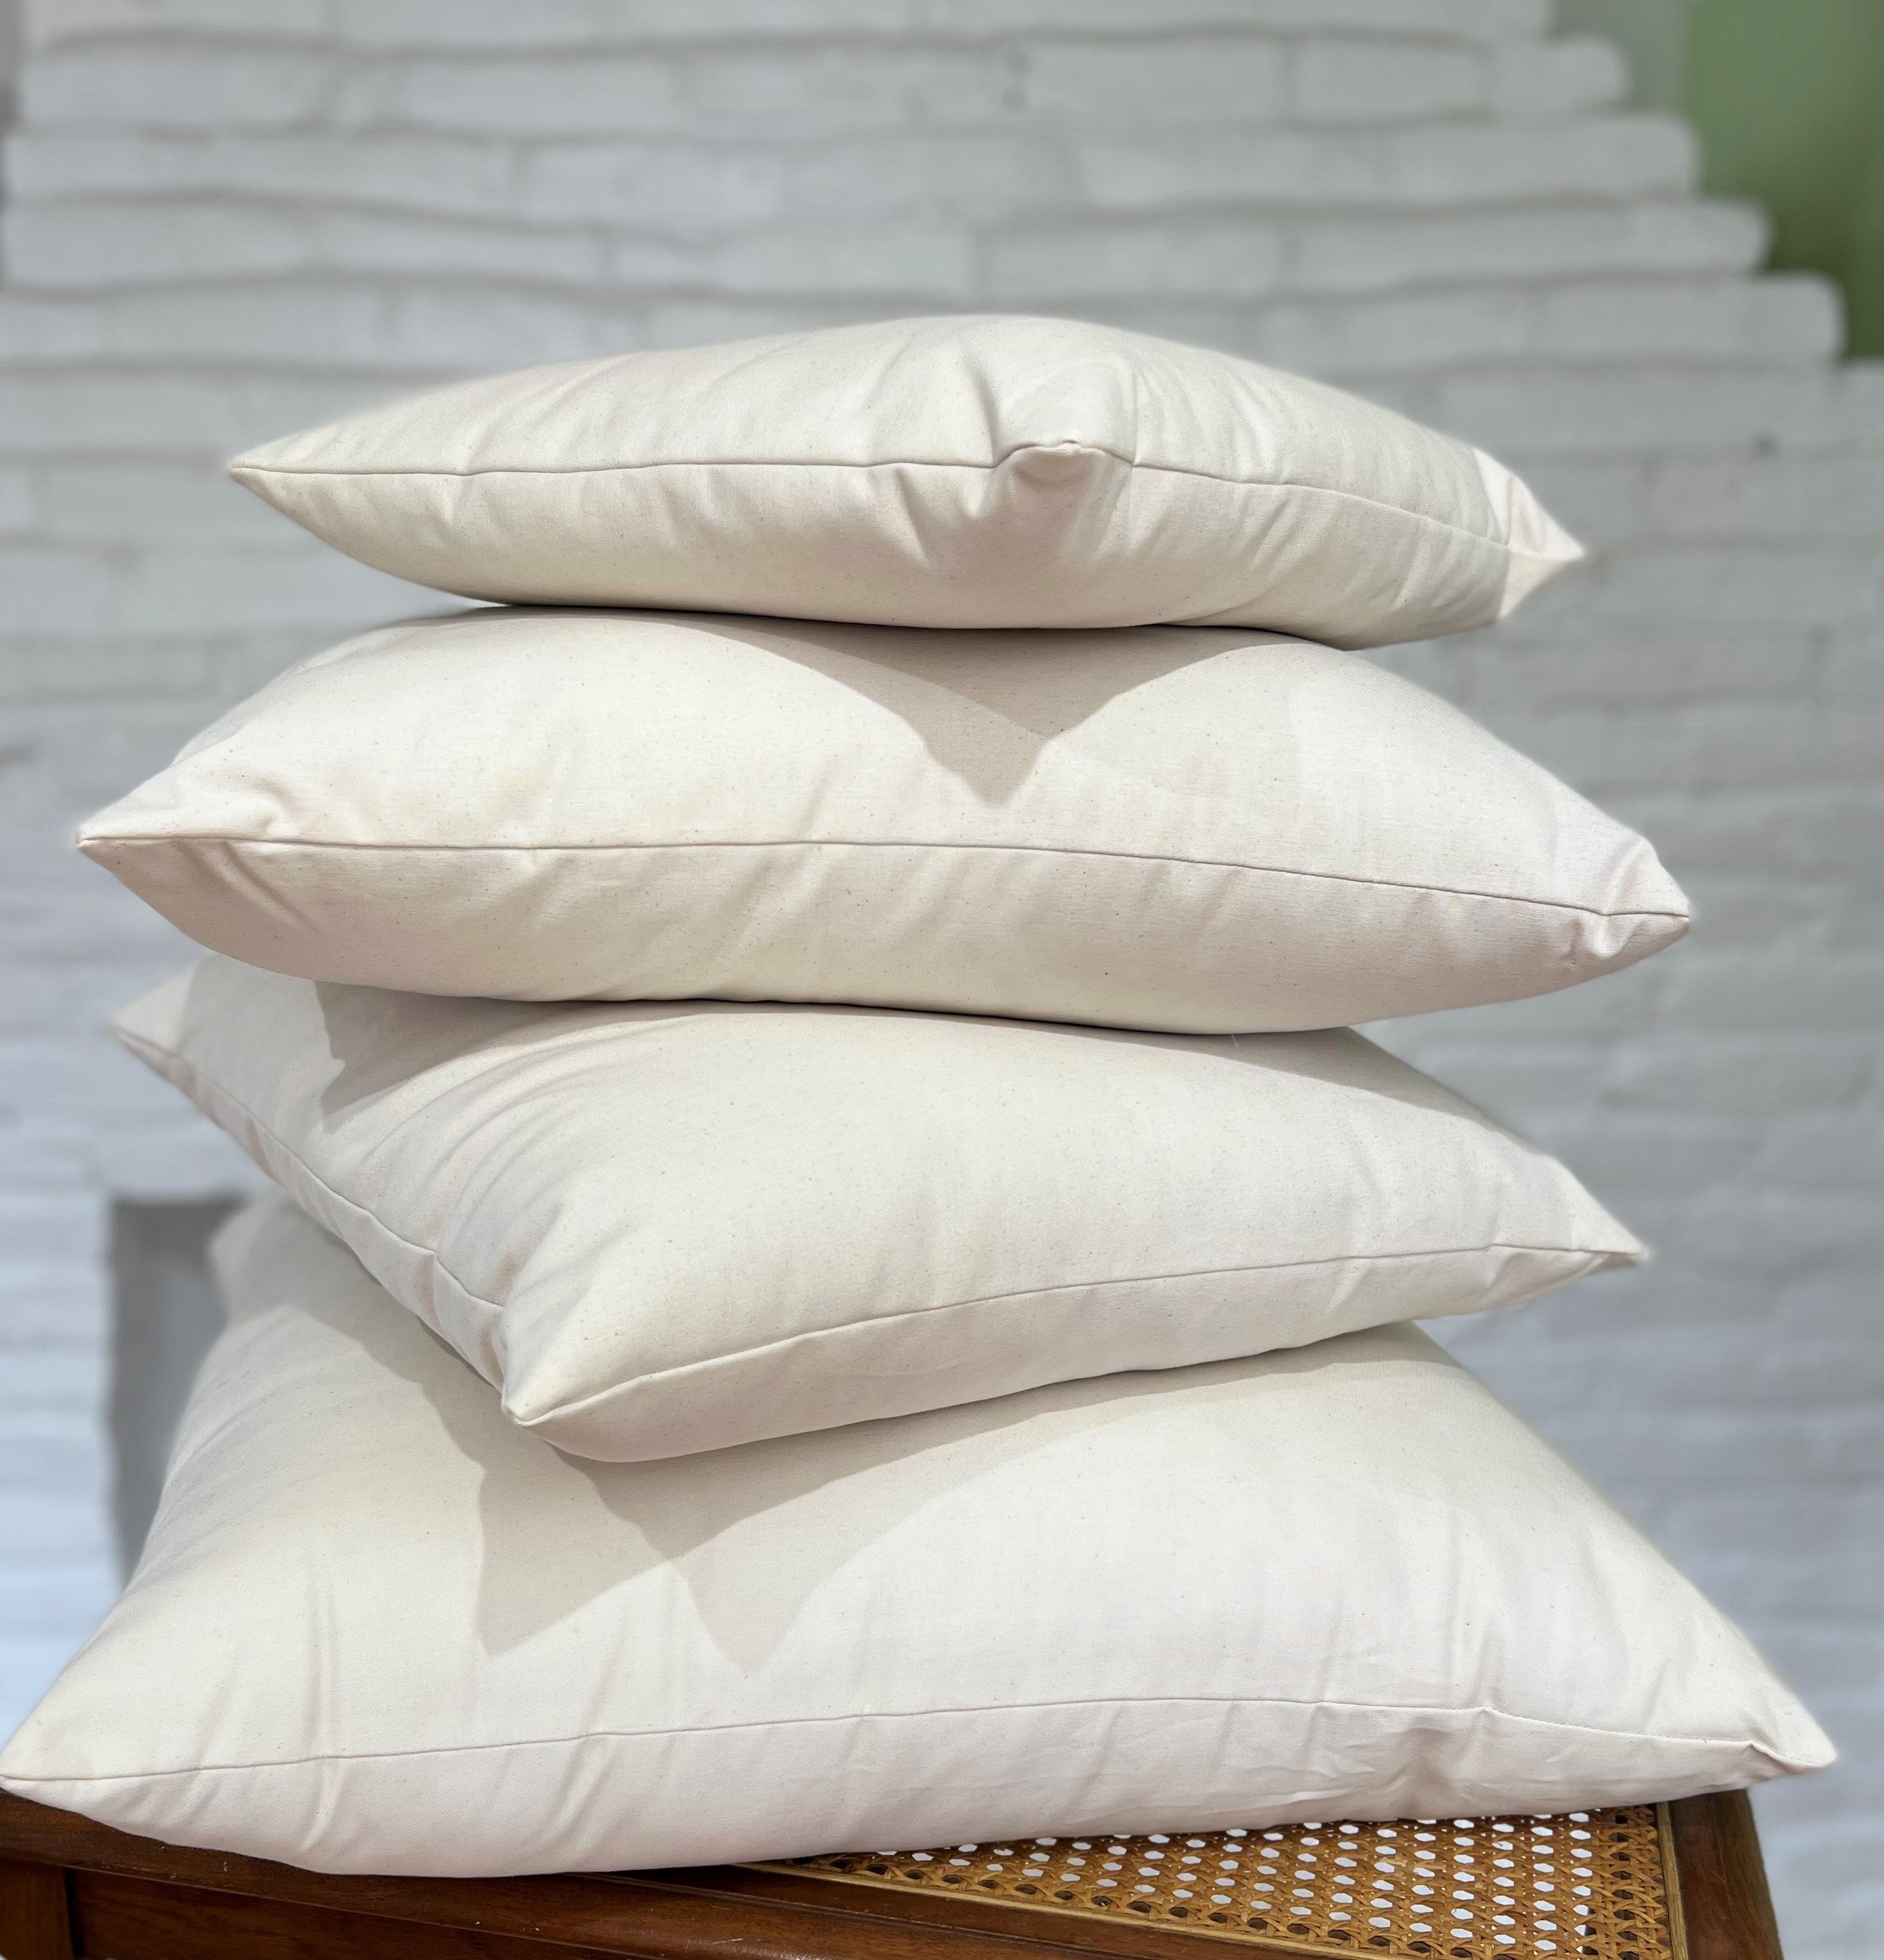 Set of 4 18x18 Pillow Inserts | Hypoallergenic Couch Pillow Stuffing, Couch  Cover, Decorative Throw Pillows for Bed, Sofa & Outdoor | Washable, White